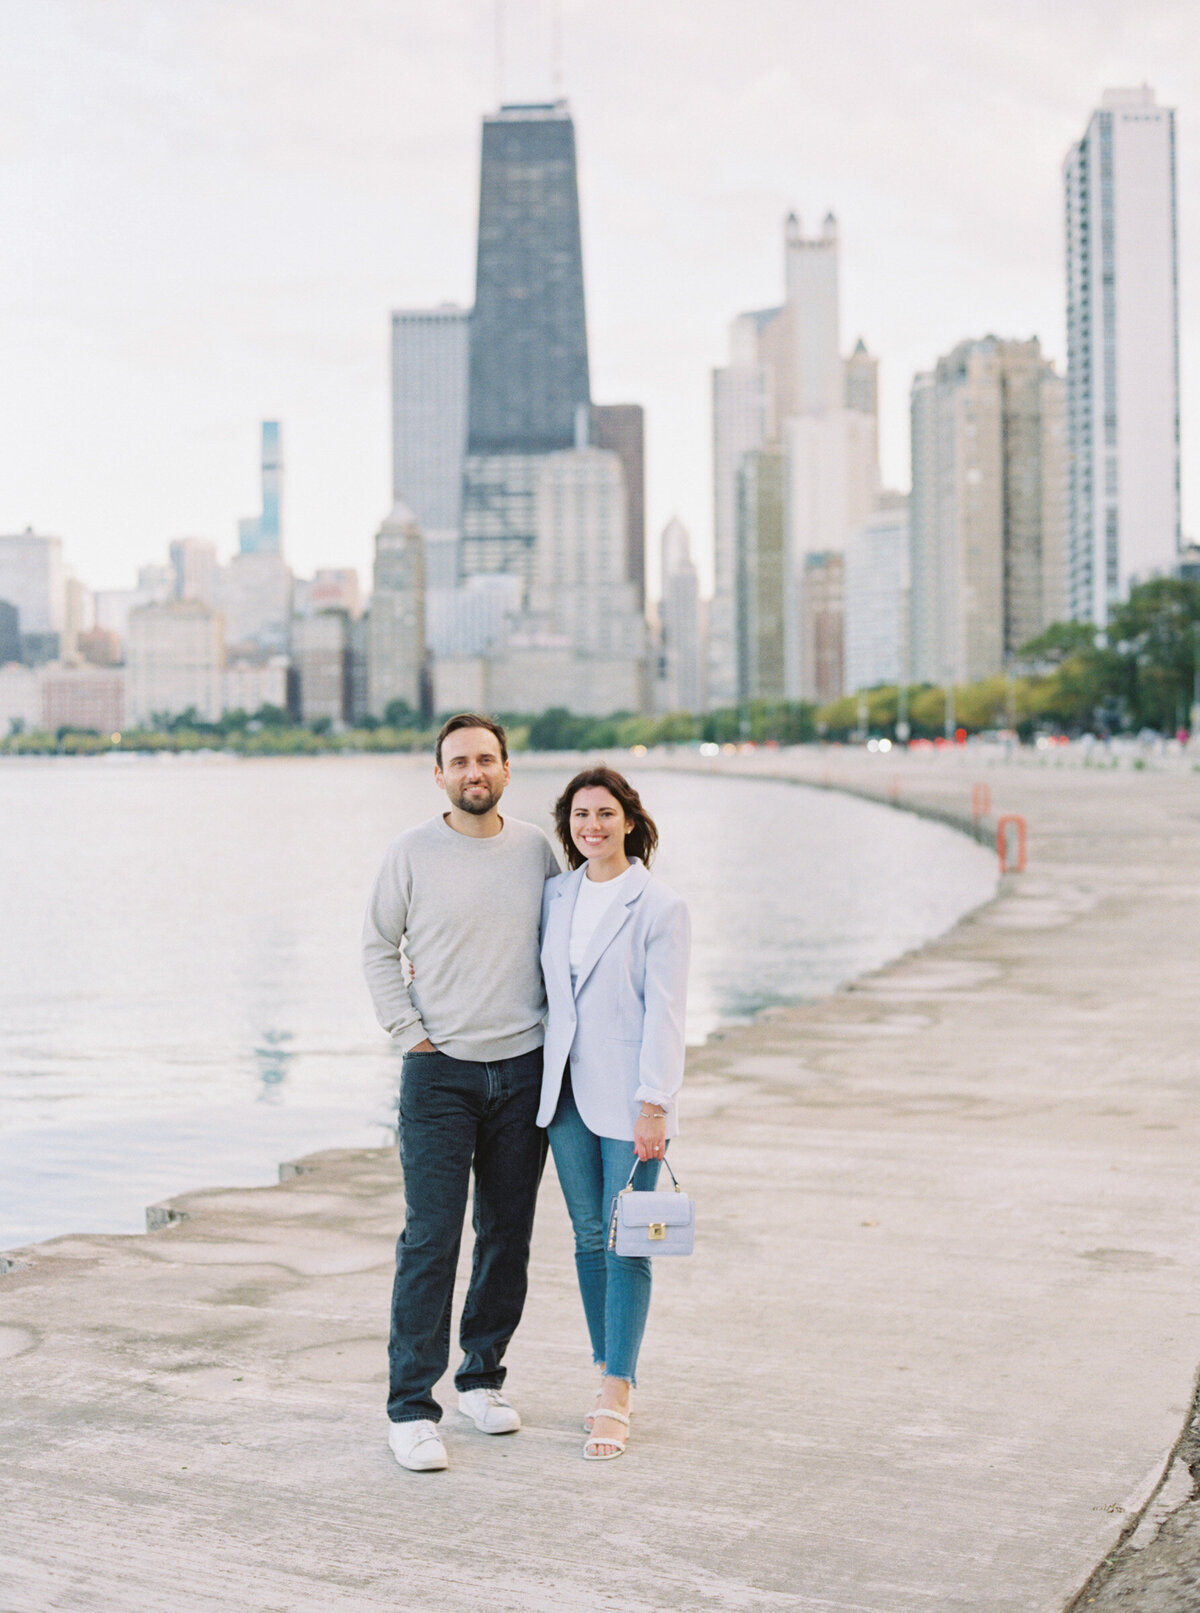 Lincoln Park Chicago Fall Engagement Session Highlights | Amarachi Ikeji Photography 19